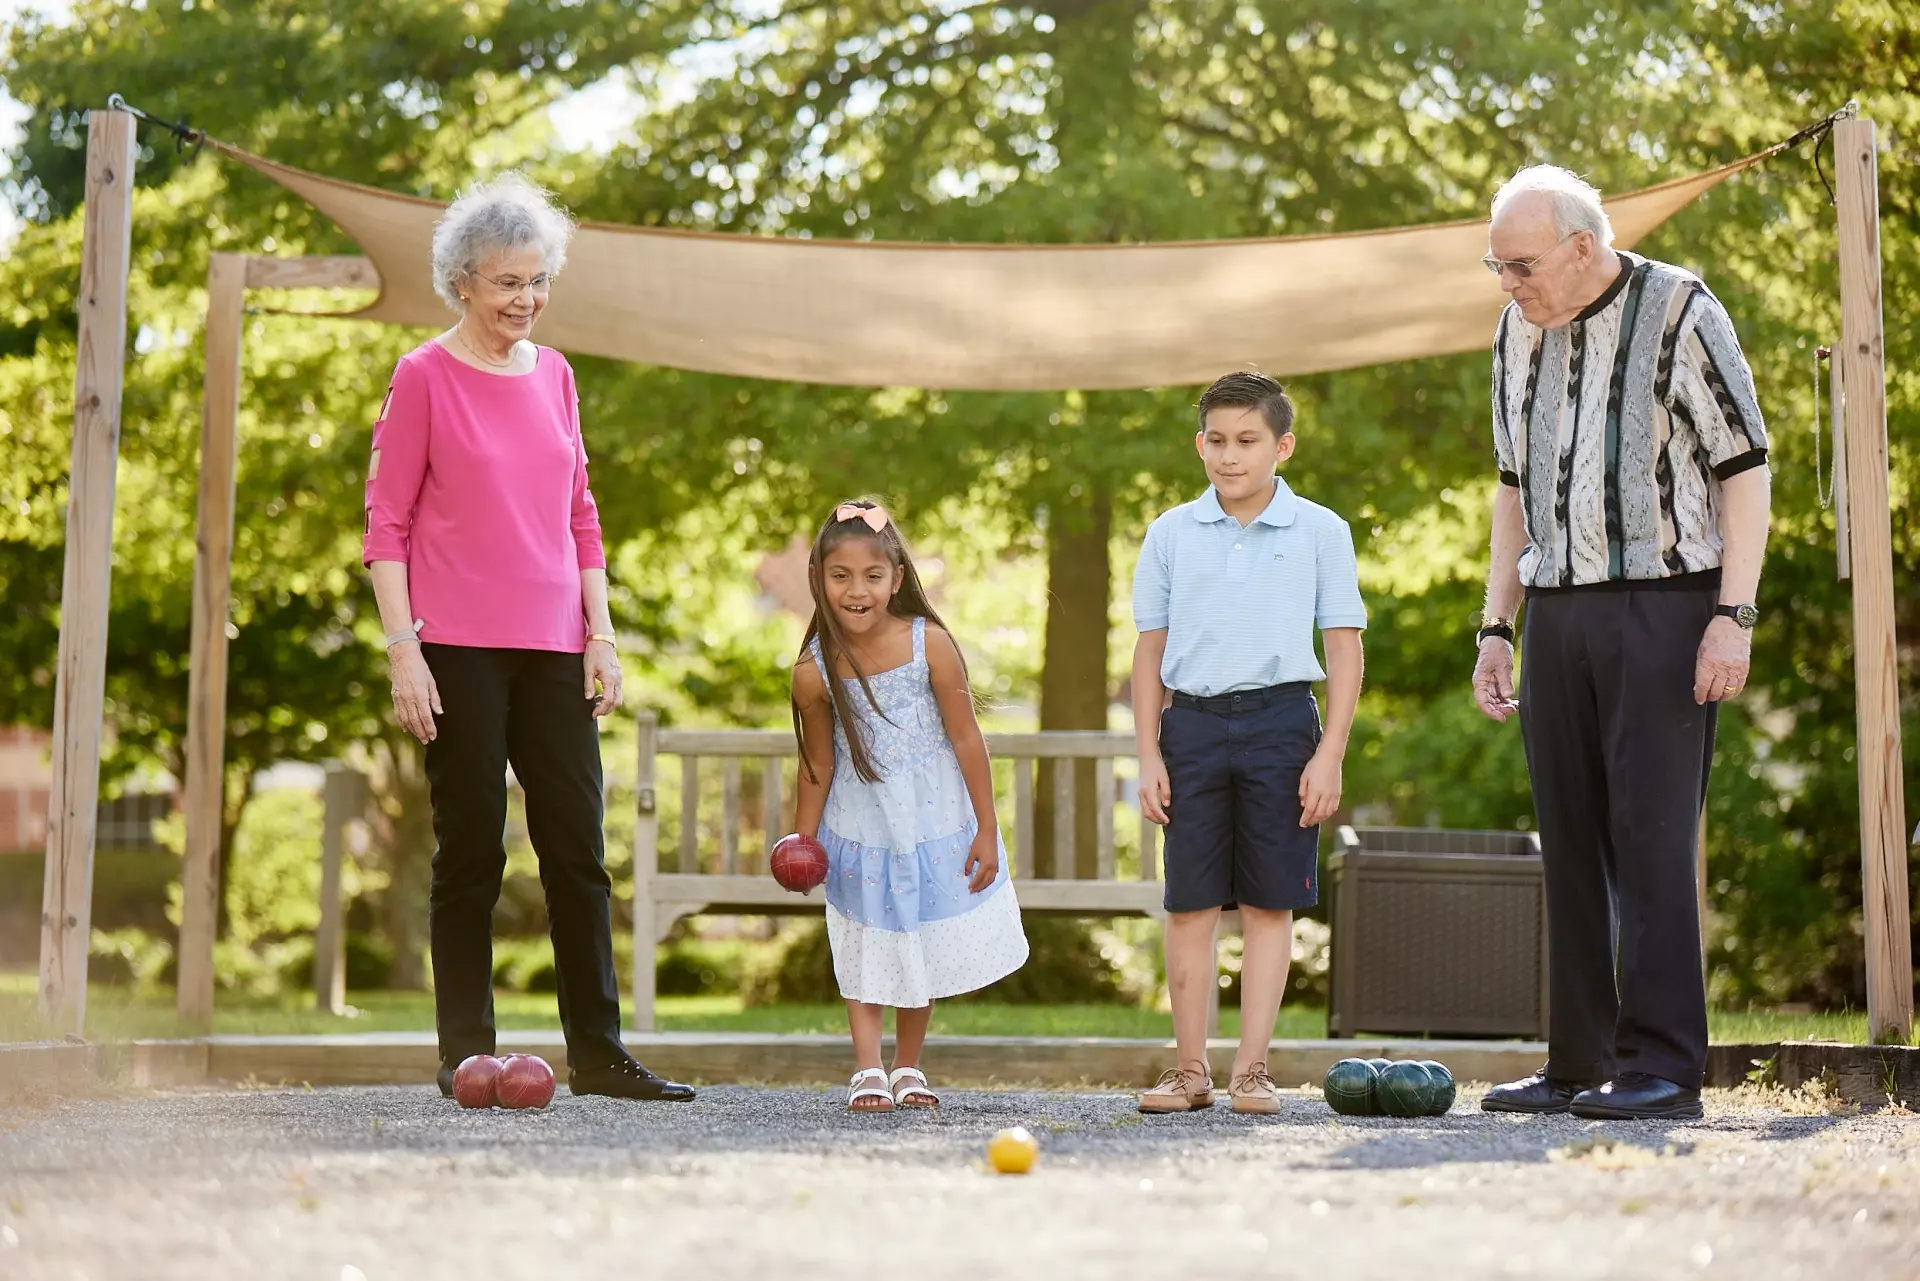 Grandparents and grandchildren playing bocce